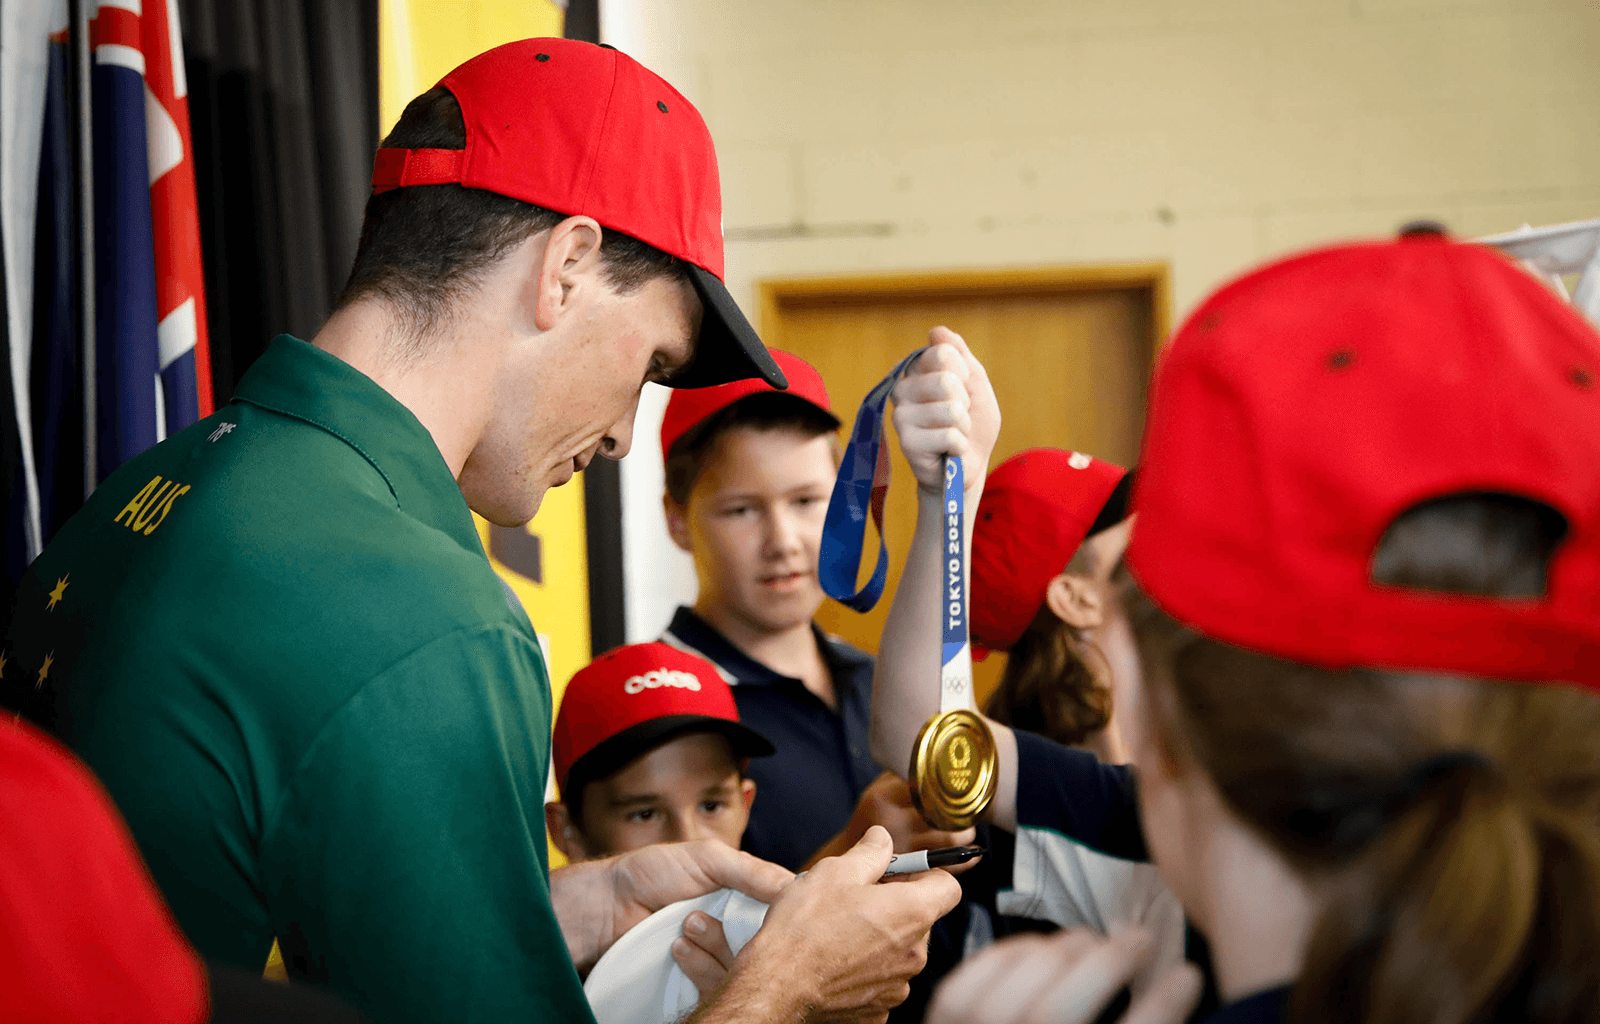 Alex Purnell's Olympic gold medal is held up in the middle of a group of students while he signs autographs.